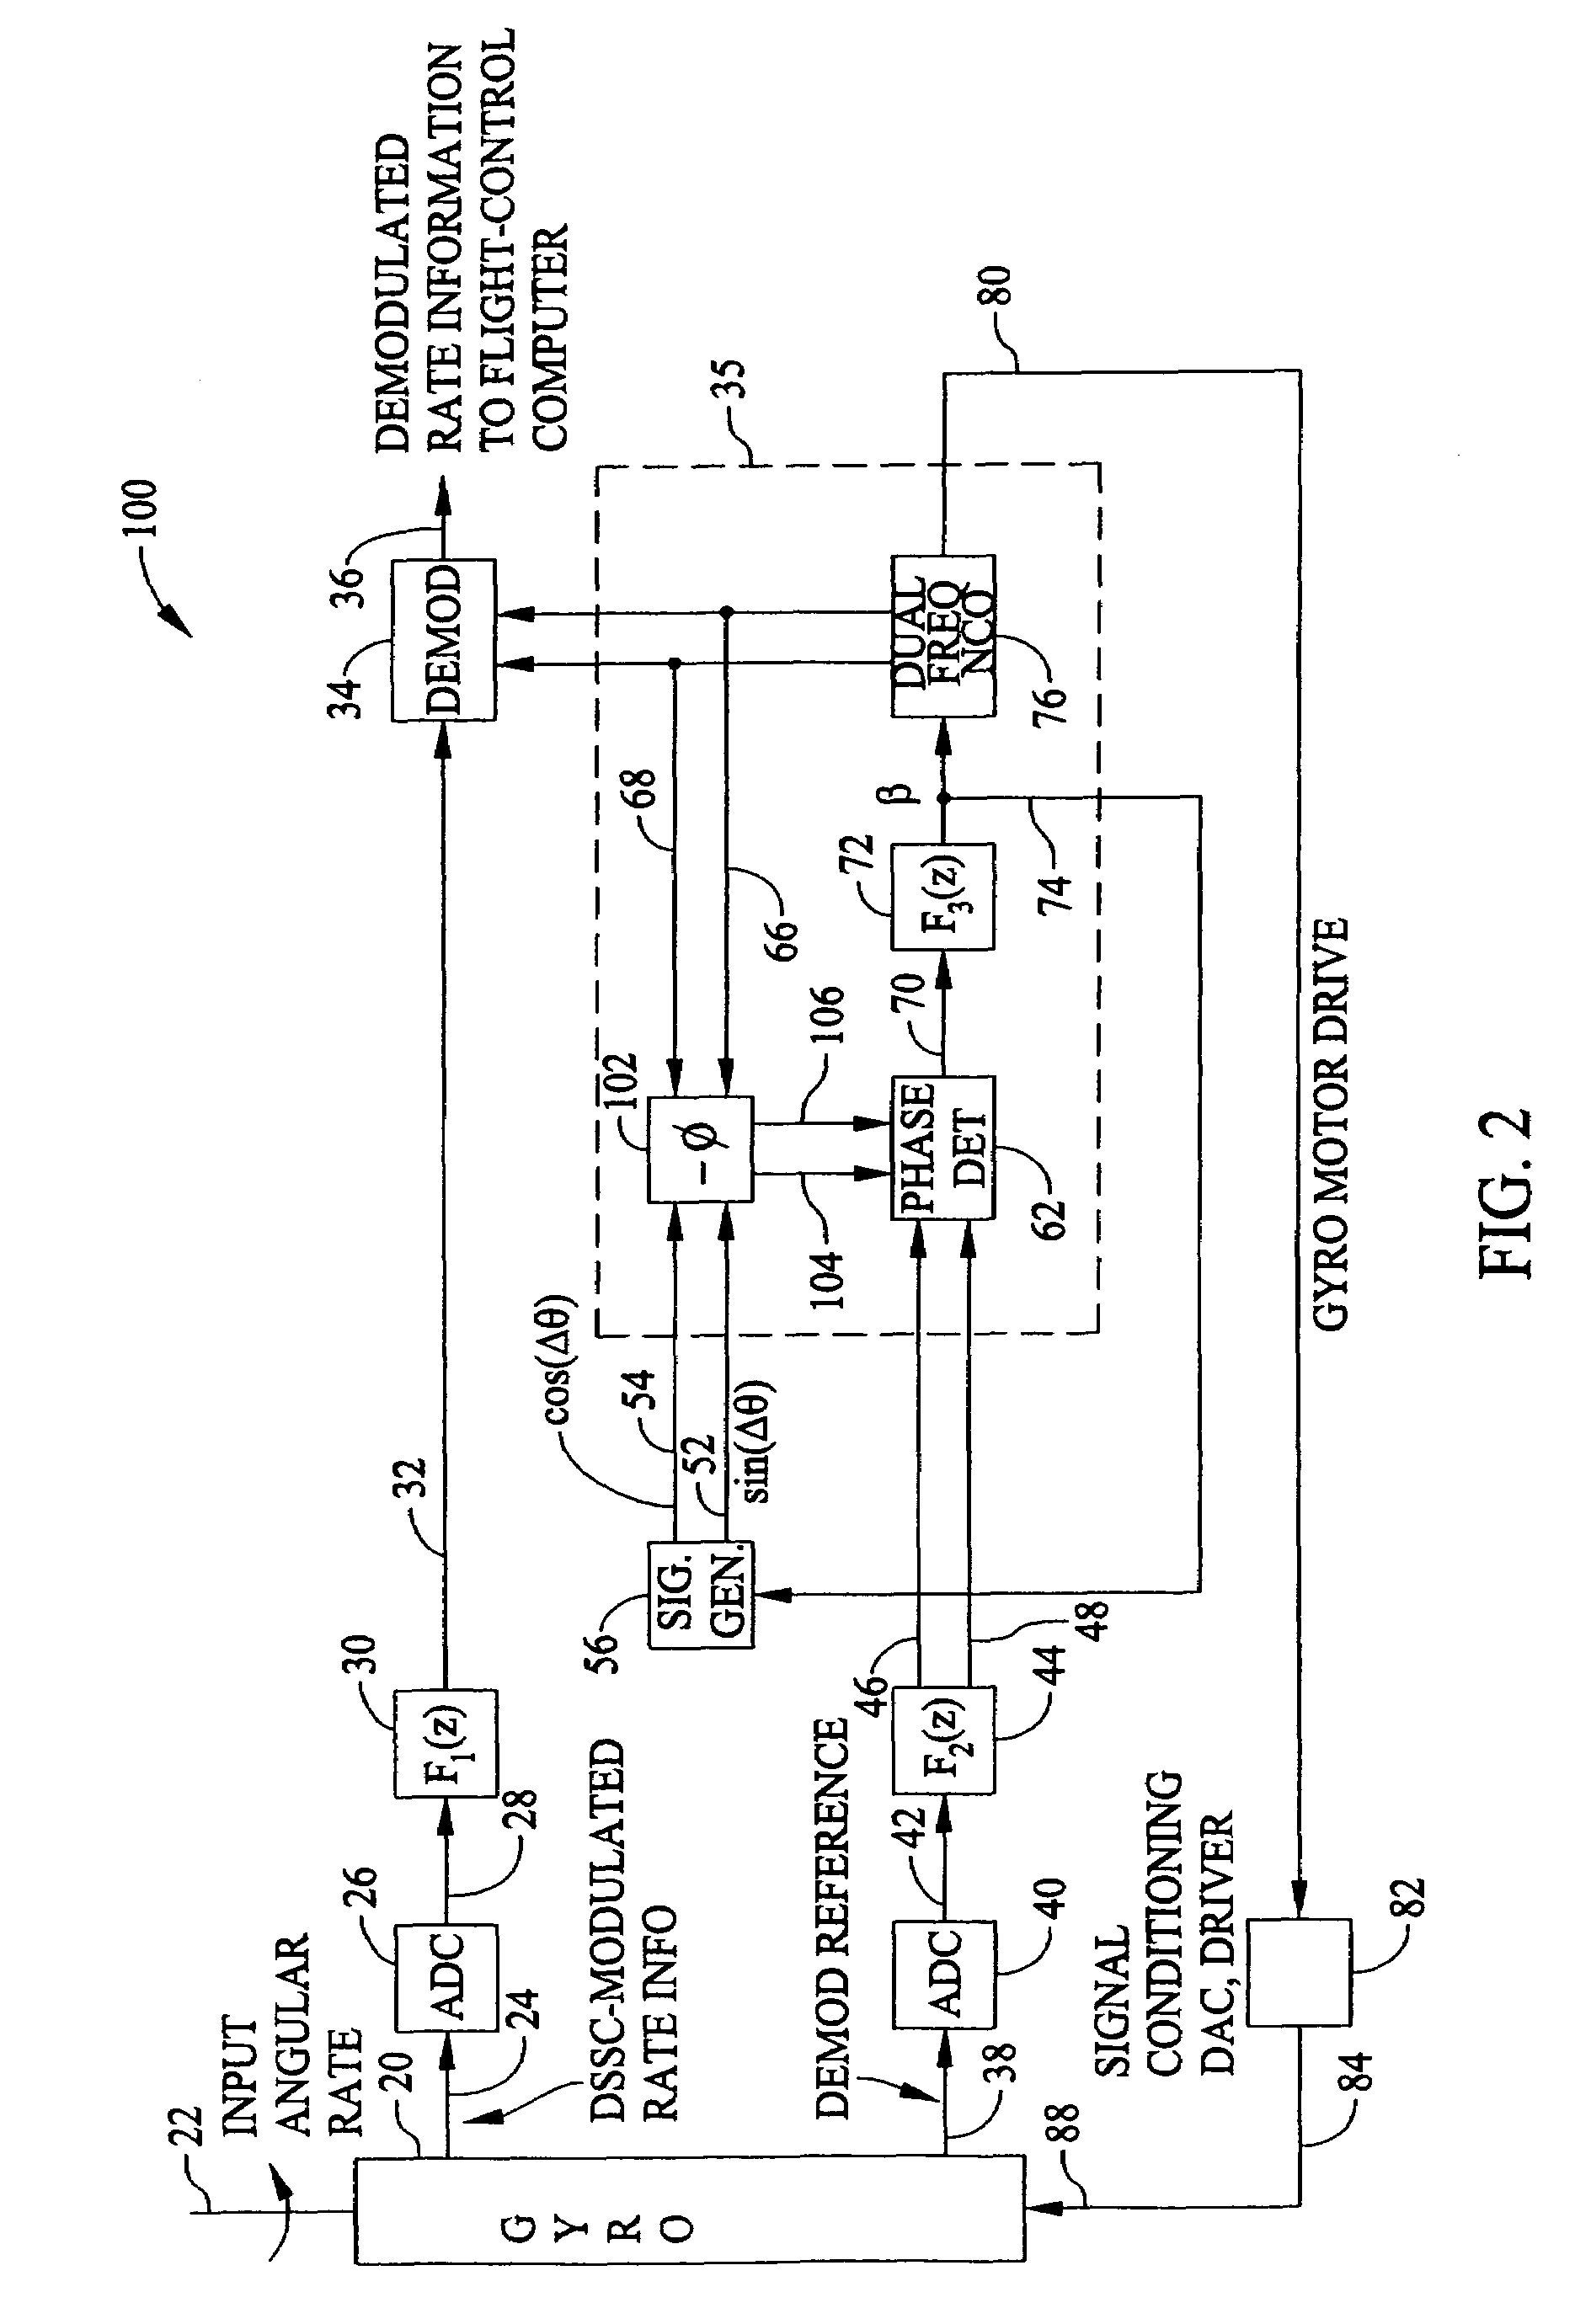 Methods and apparatus for delay free phase shifting in correcting PLL phase offset